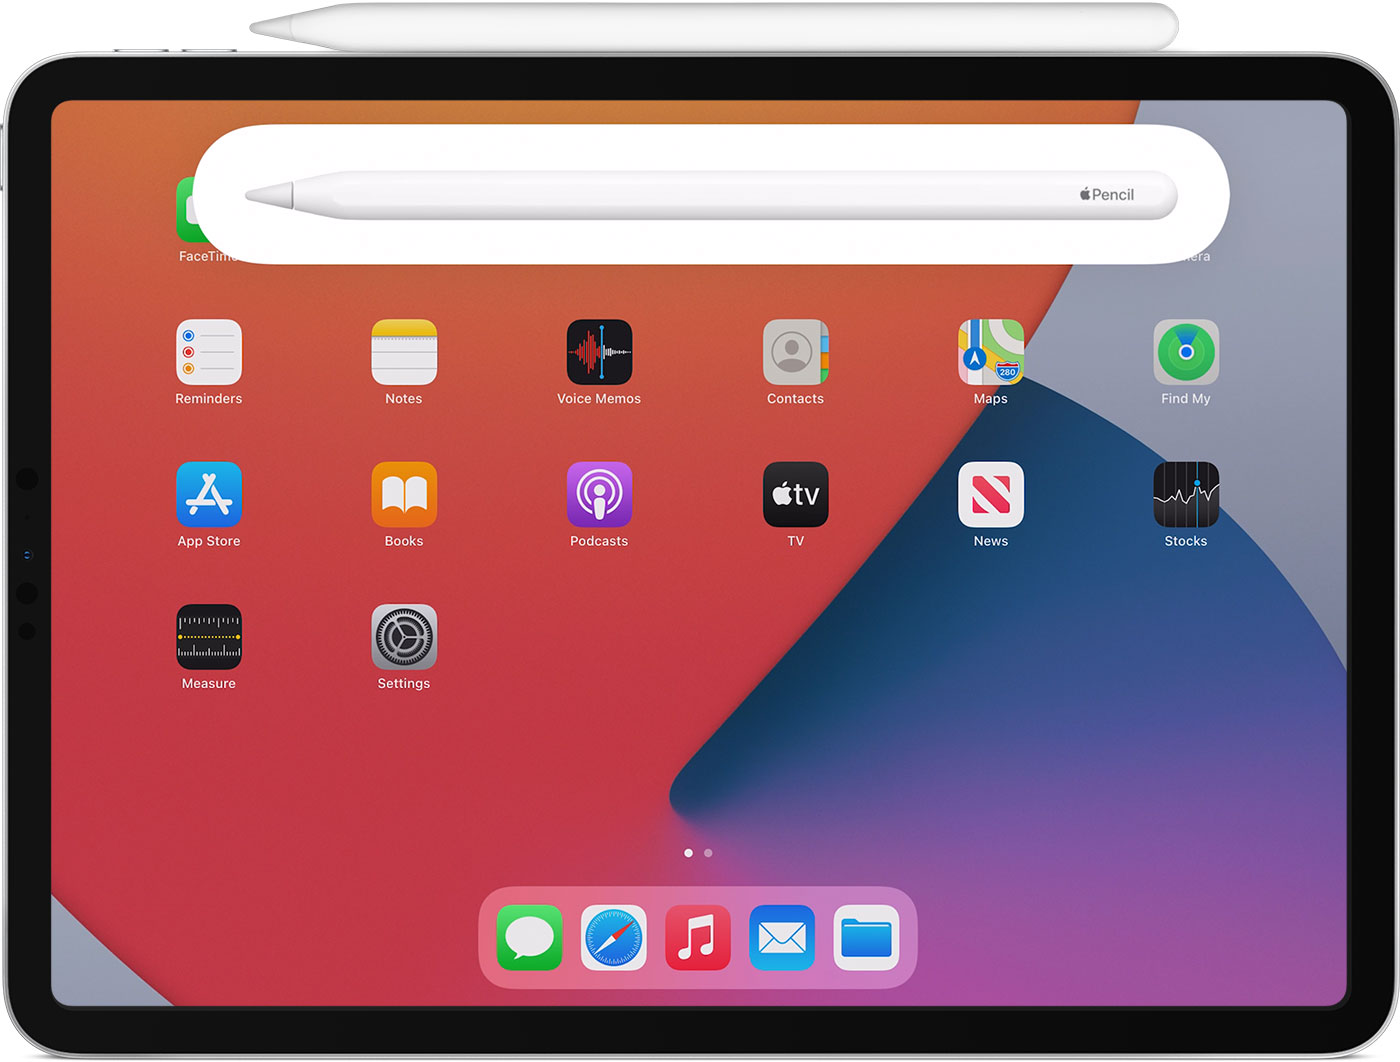 Does the new apple pencil work with ipad pro 2017 Connect Apple Pencil With Your Ipad Apple Support